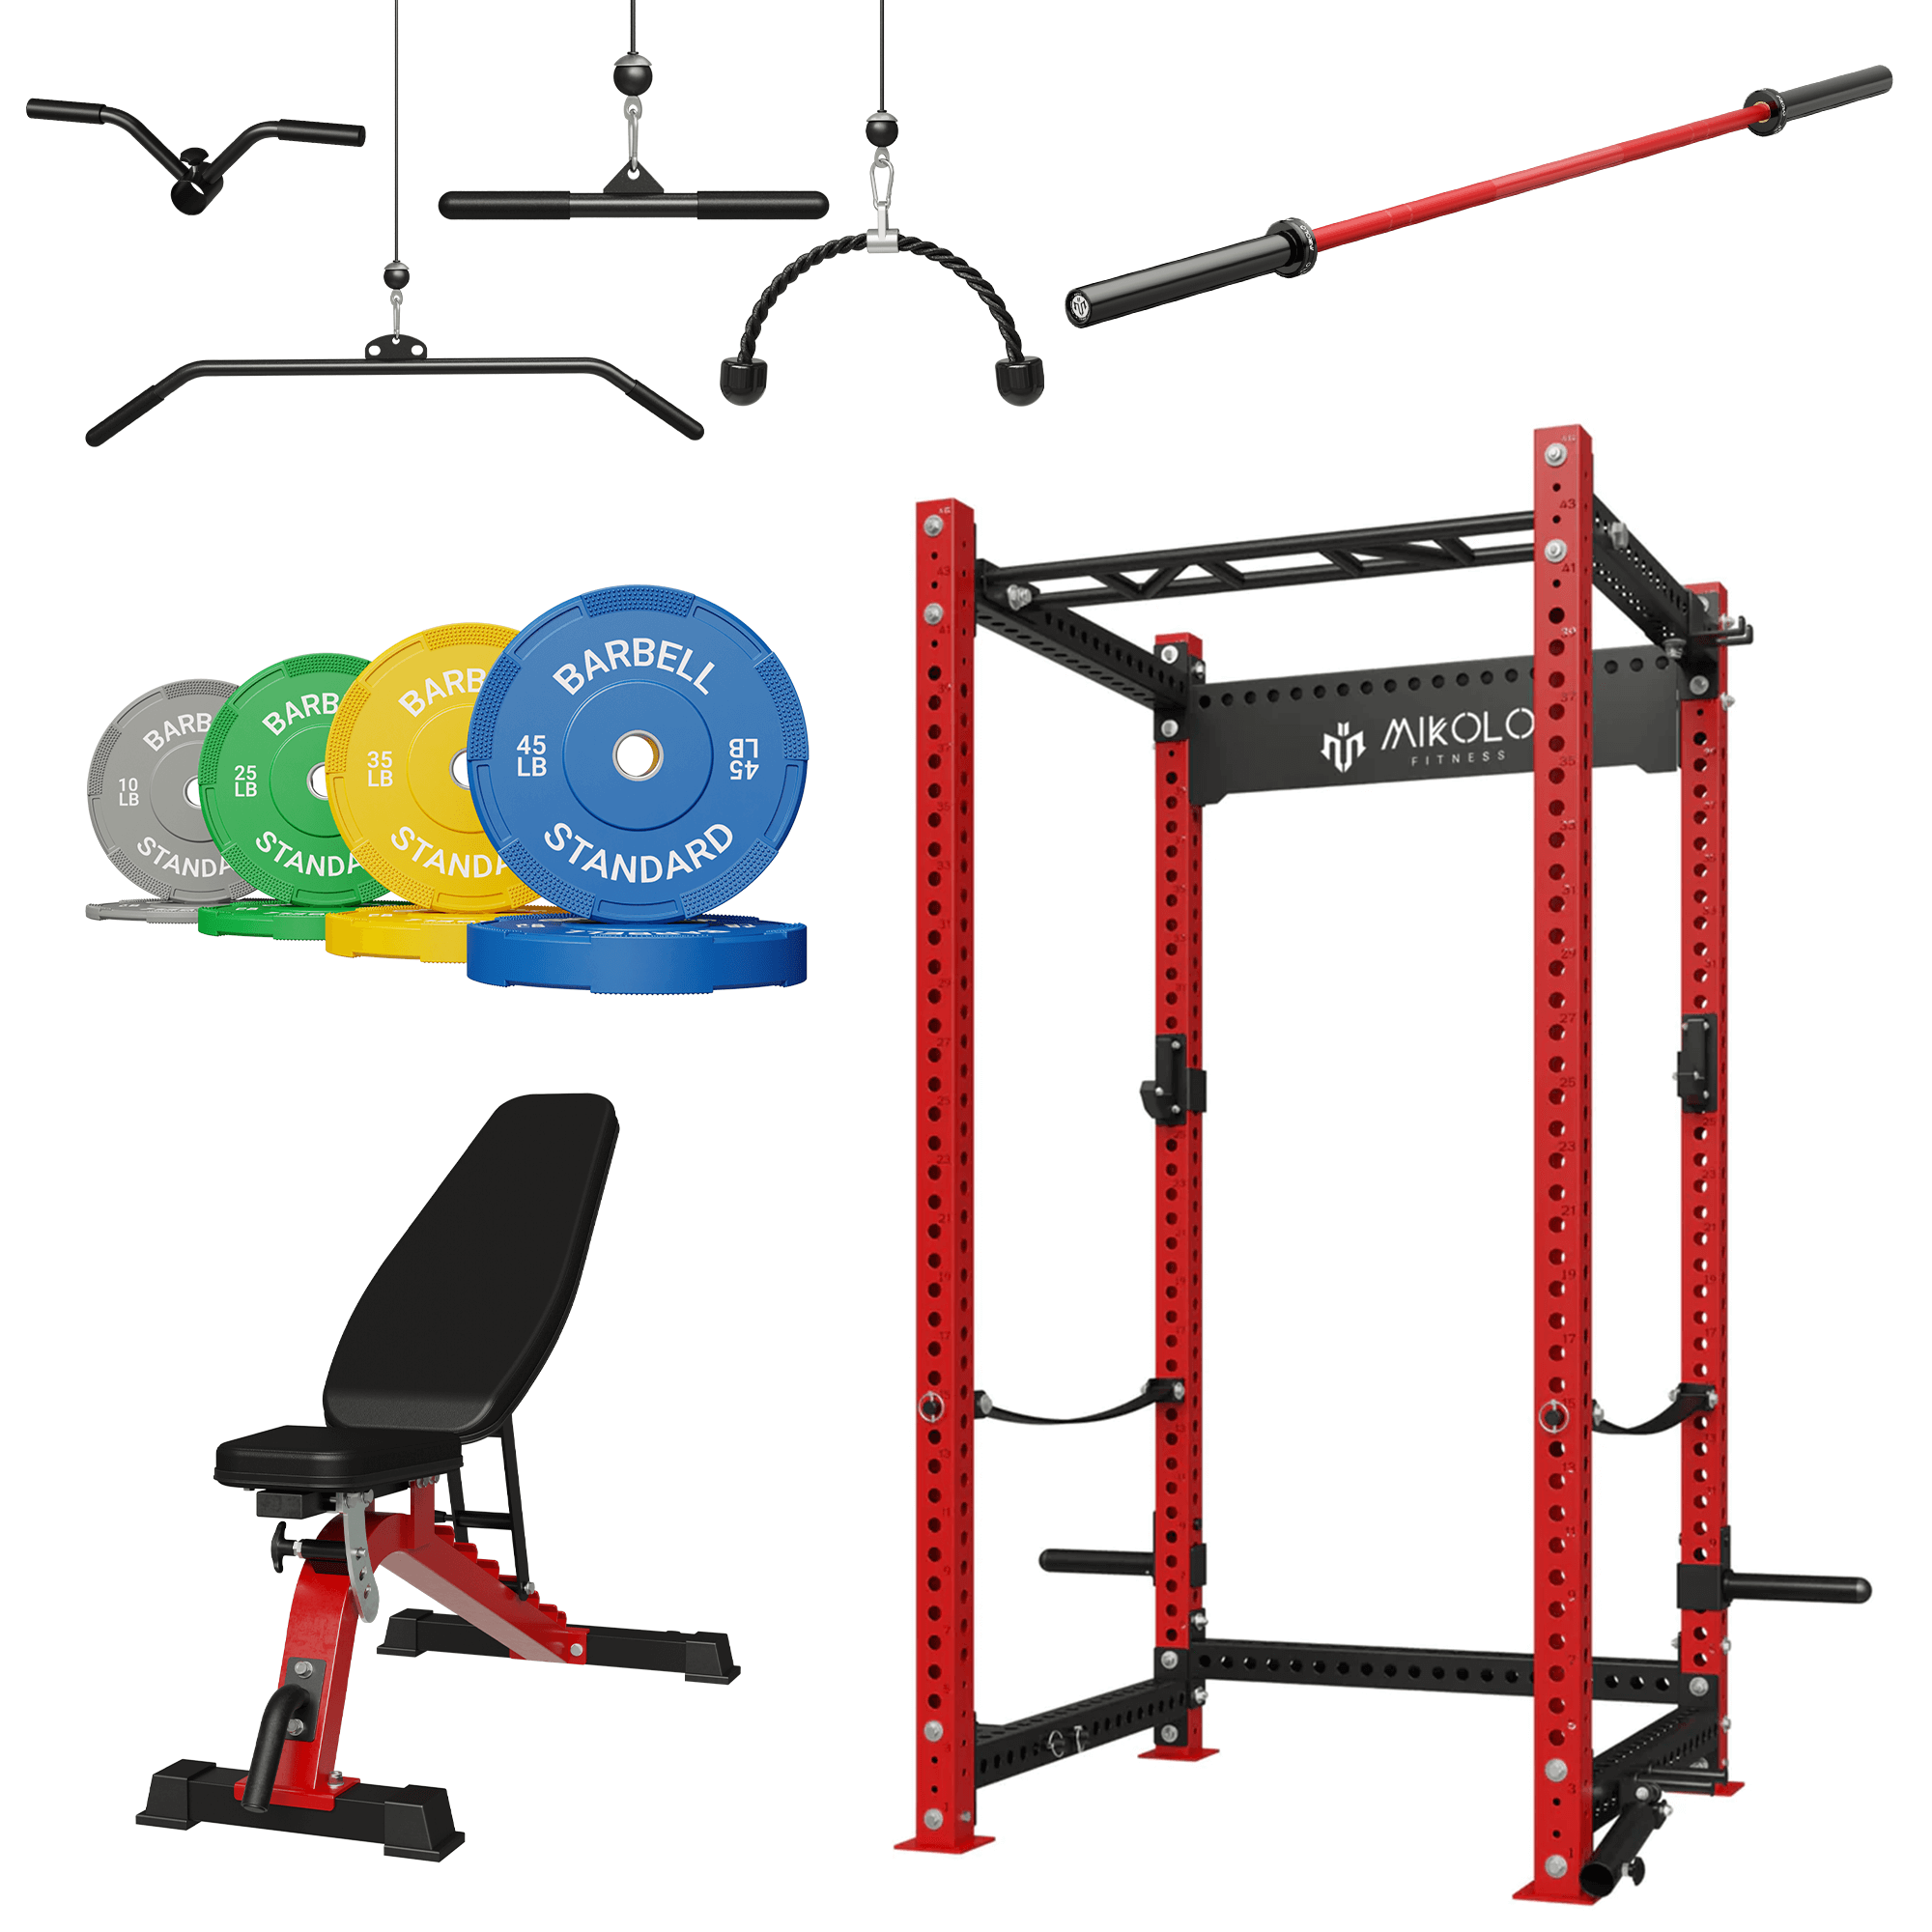 How to protect j-cups from barbell knurl? : r/homegym